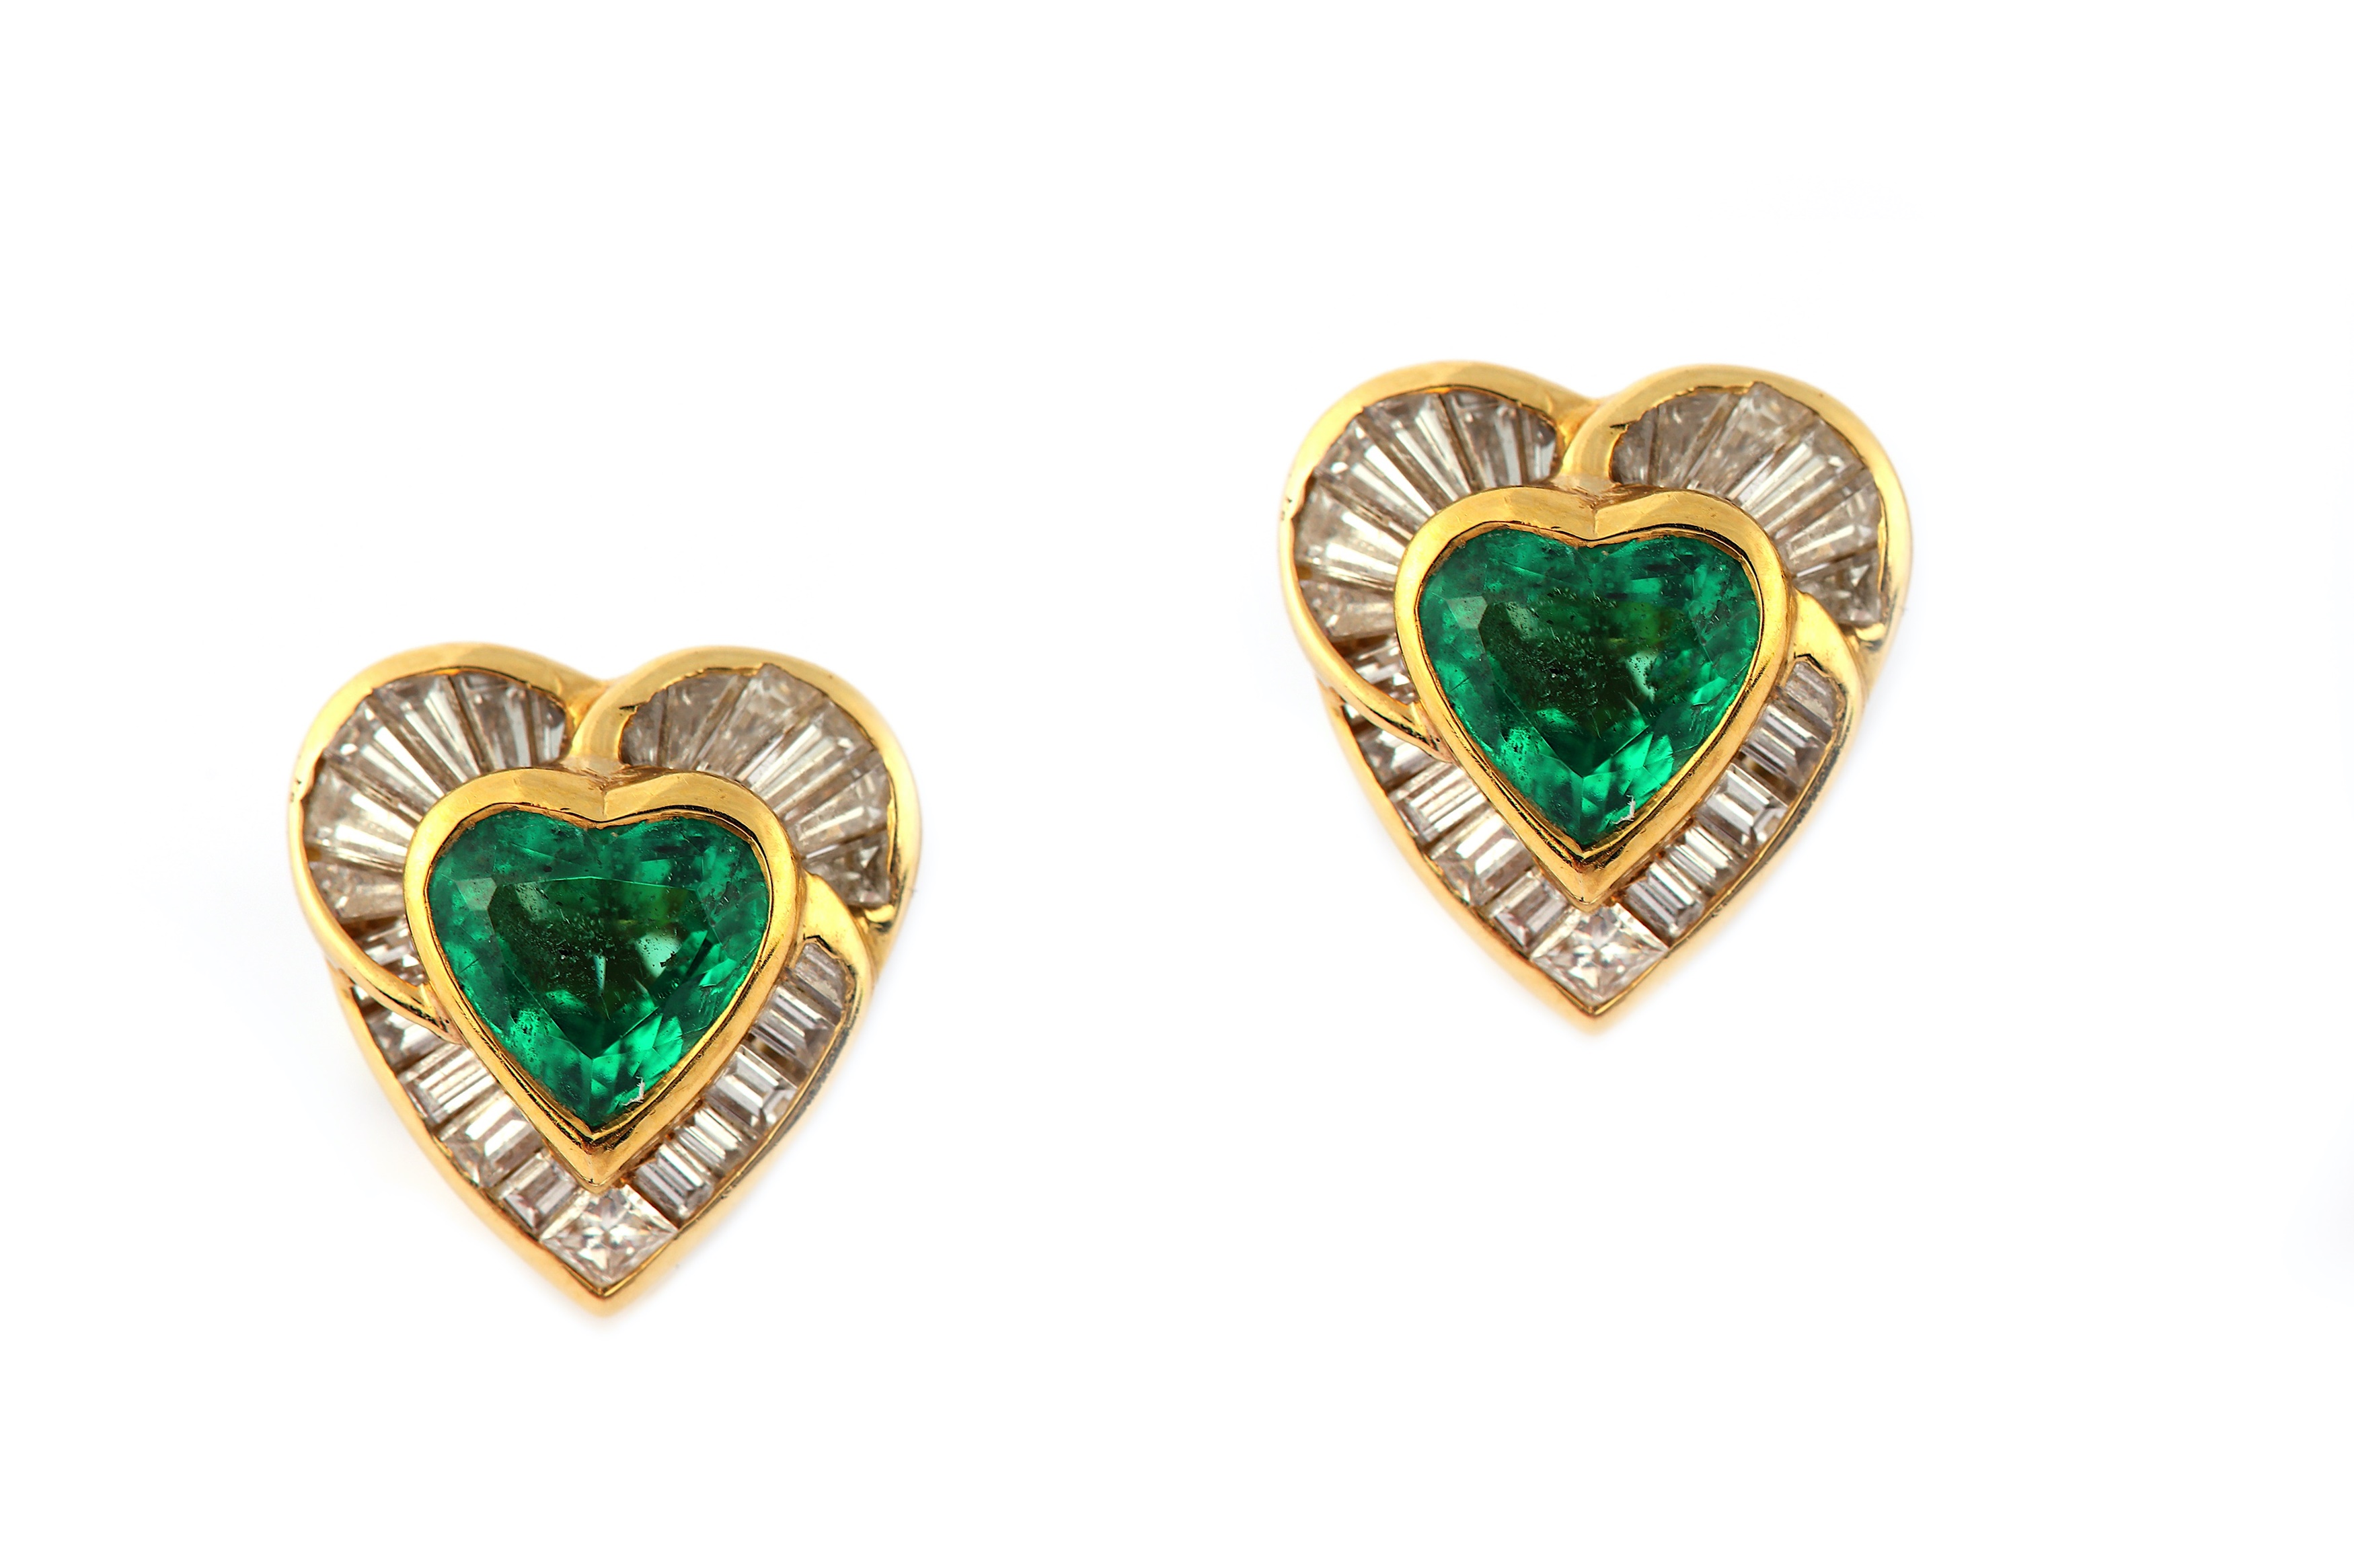 A pair of emerald and diamond earclips, by H. Stern